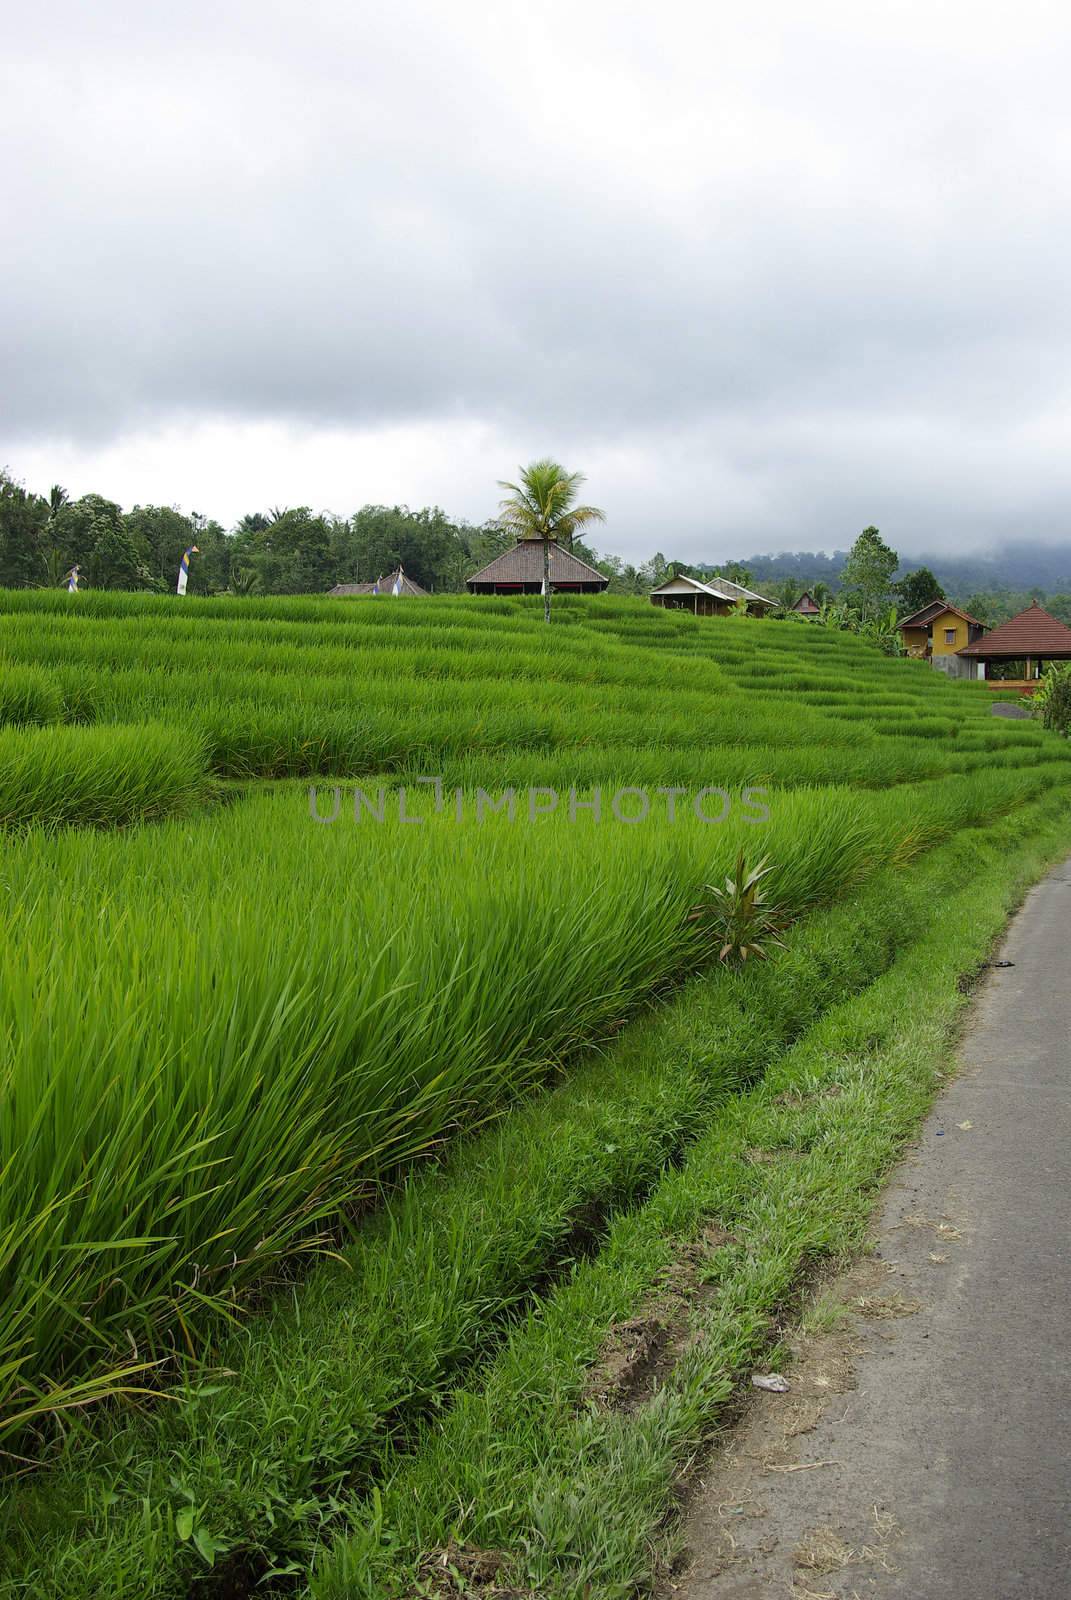 Ricefield and huts in Bali